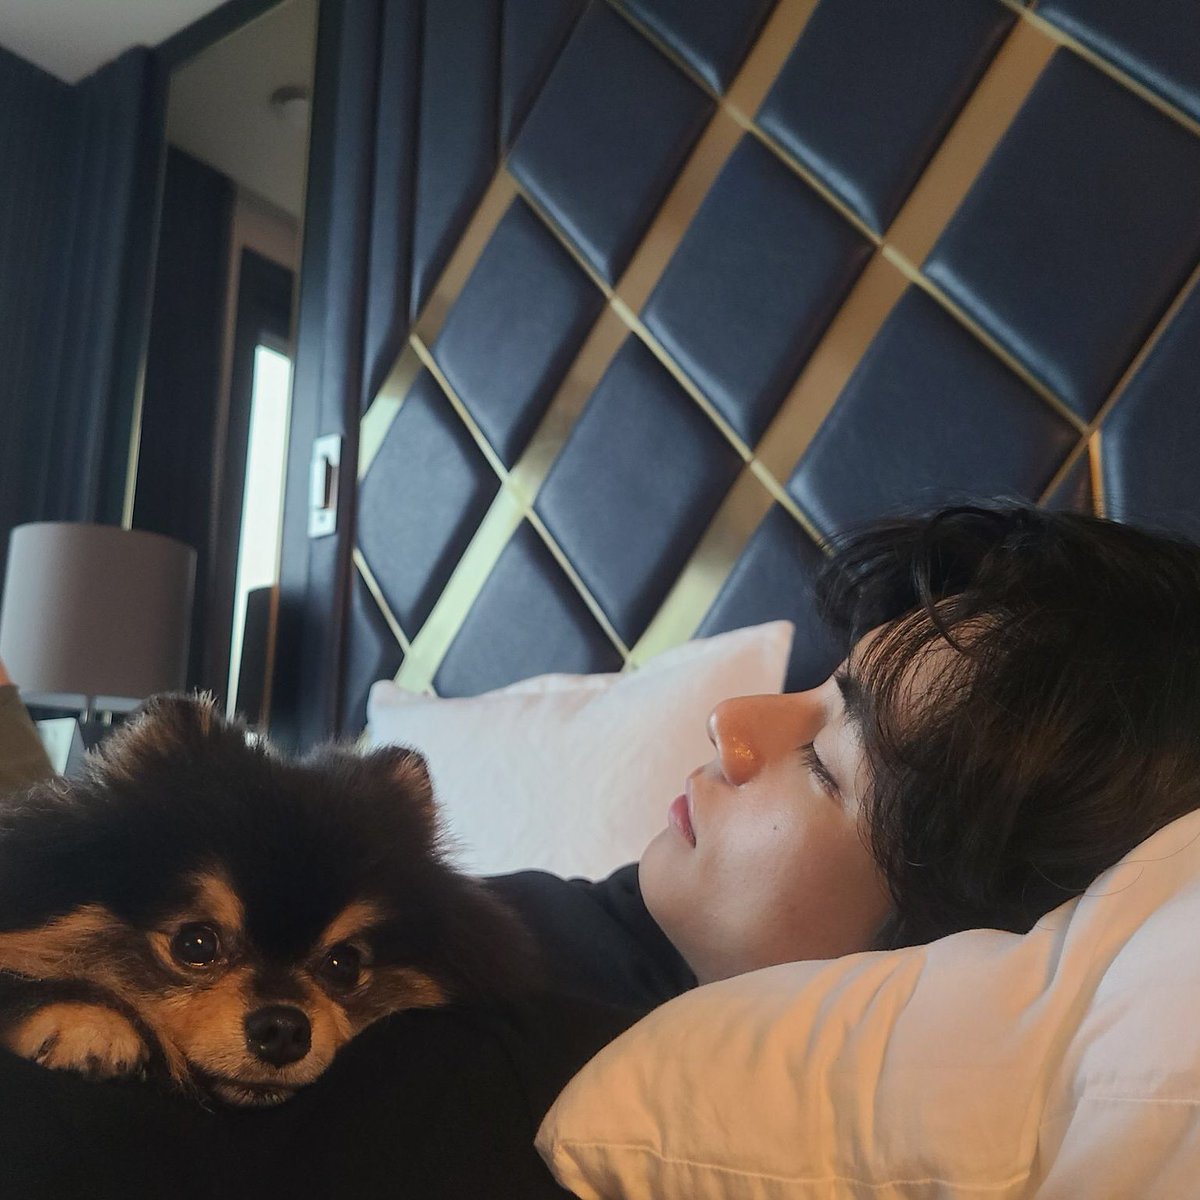 Ur camera roll filled with him and yeontan’s soft pictures 